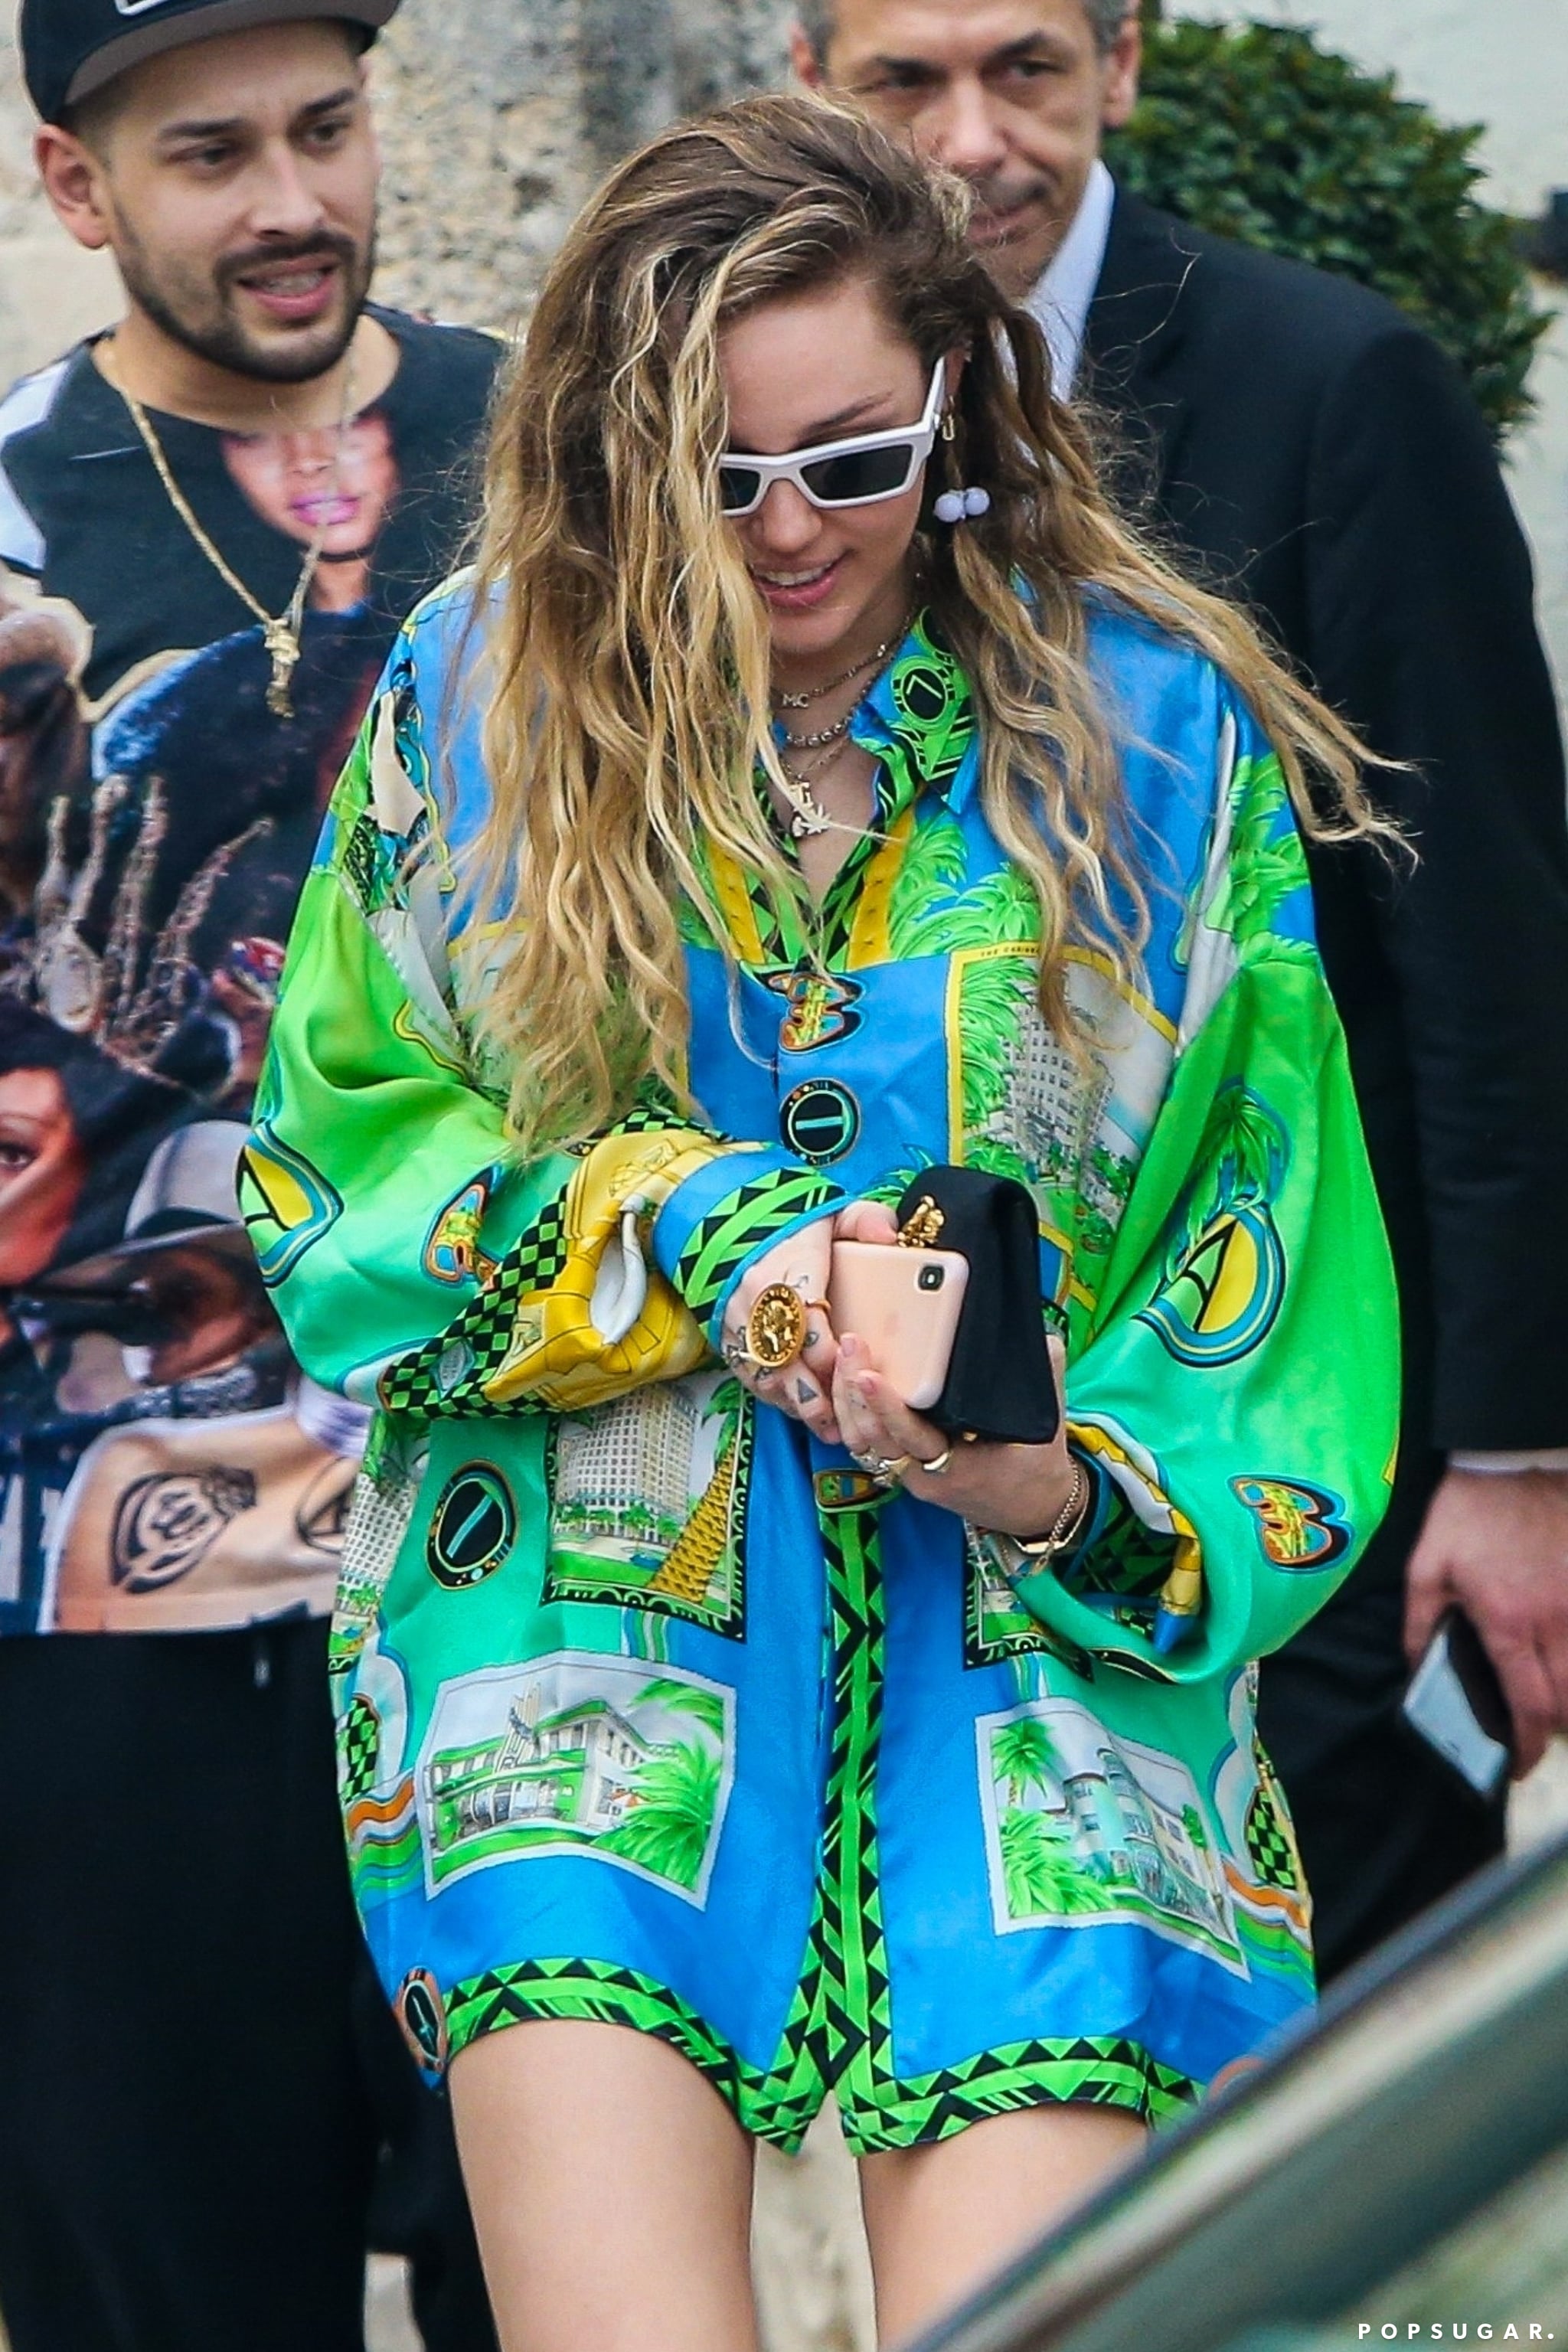 Fashion, Shopping & Style | Miley Cyrus Looks Like a Vacation Goddess in  This Versace Shirt From the '90s | POPSUGAR Fashion Photo 2